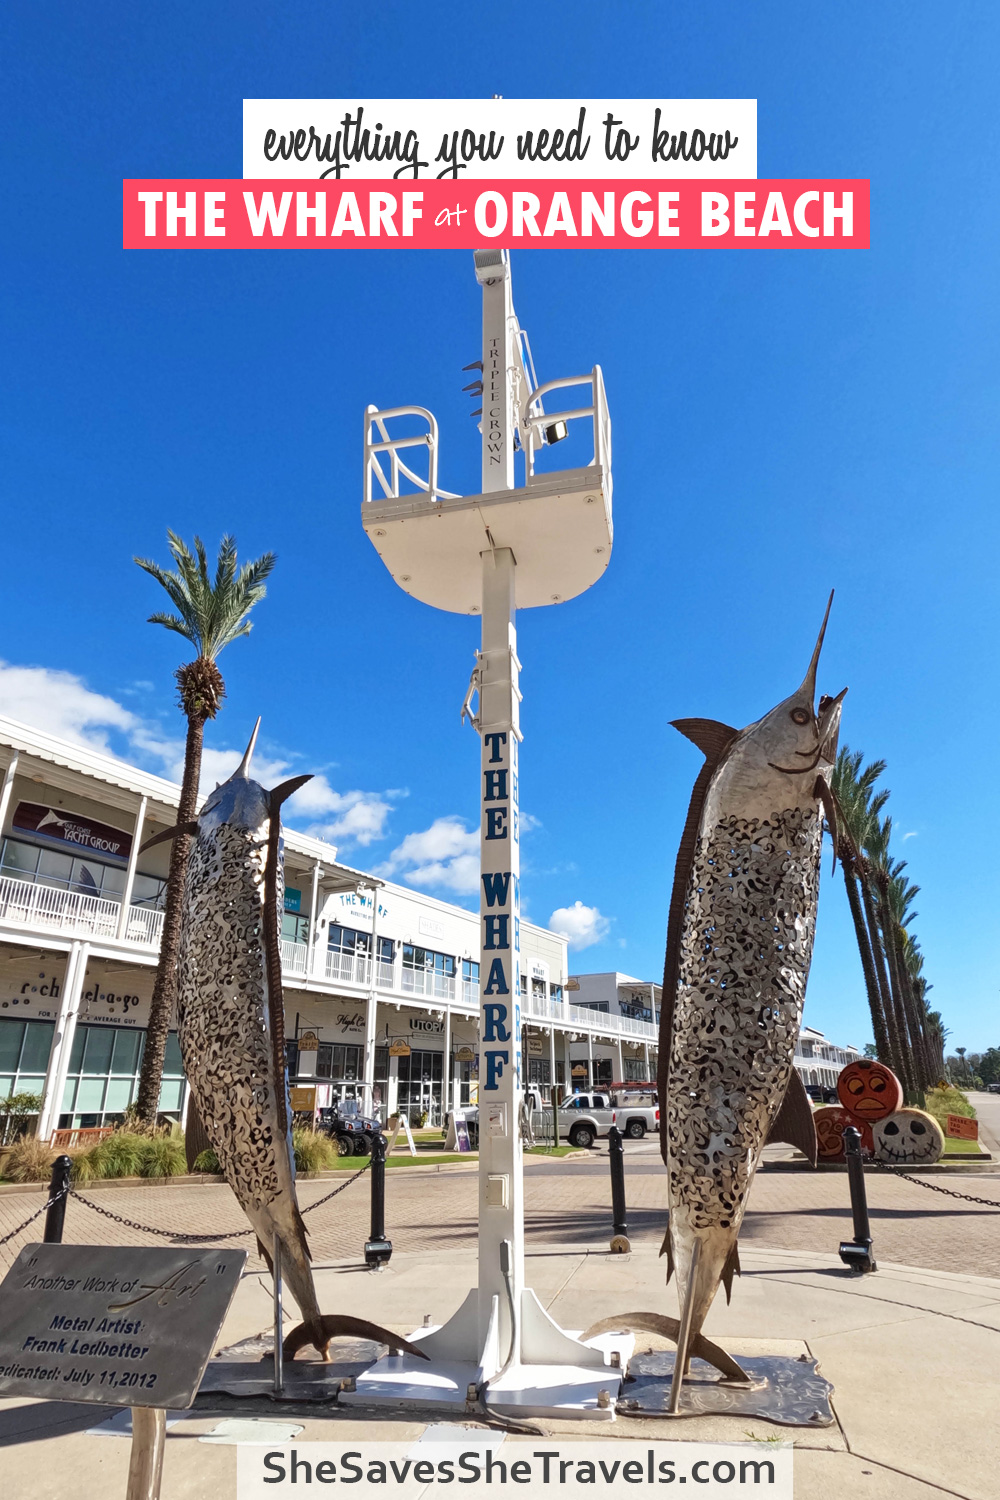 everything you need to know the wharf at orange beach photo of fish sculptures and palm trees